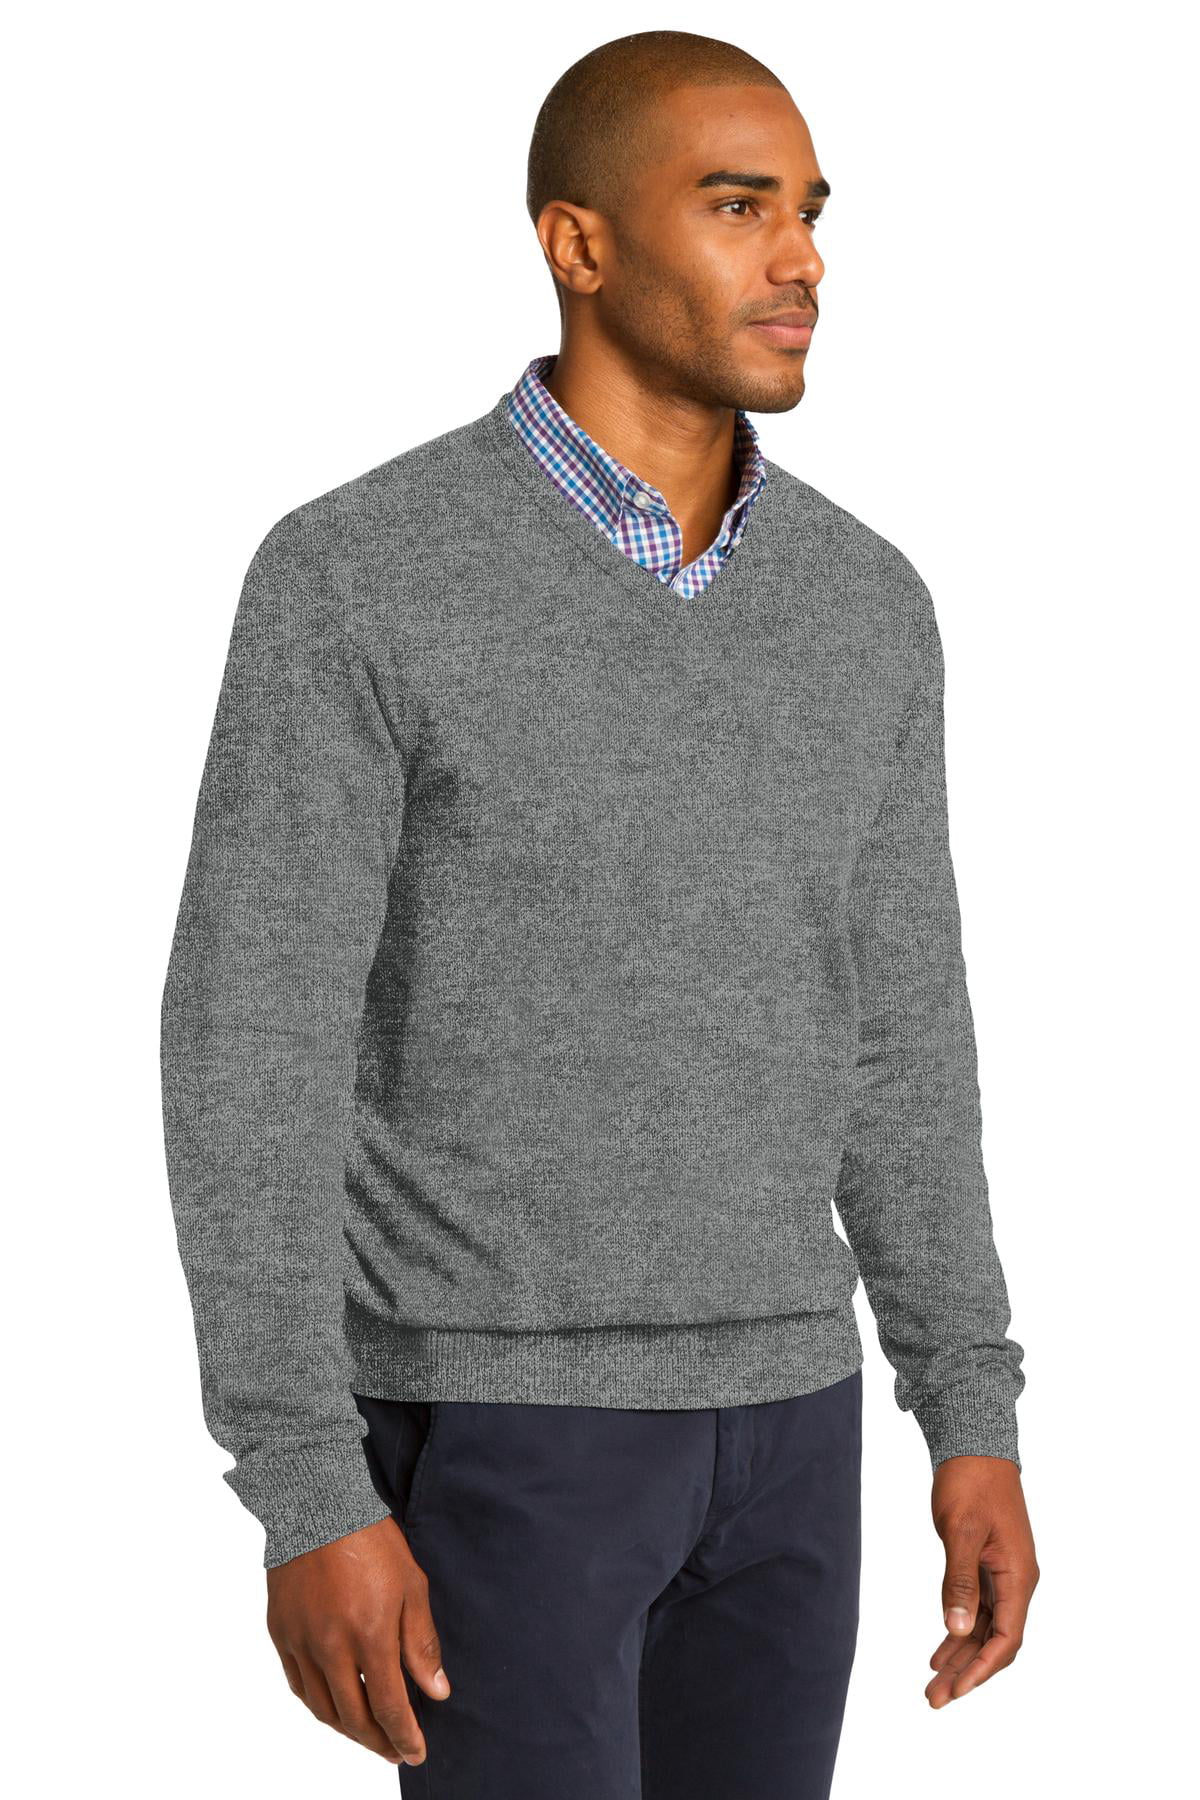 Port Authority V Neck Sweater-XL (Charcoal Heather) 